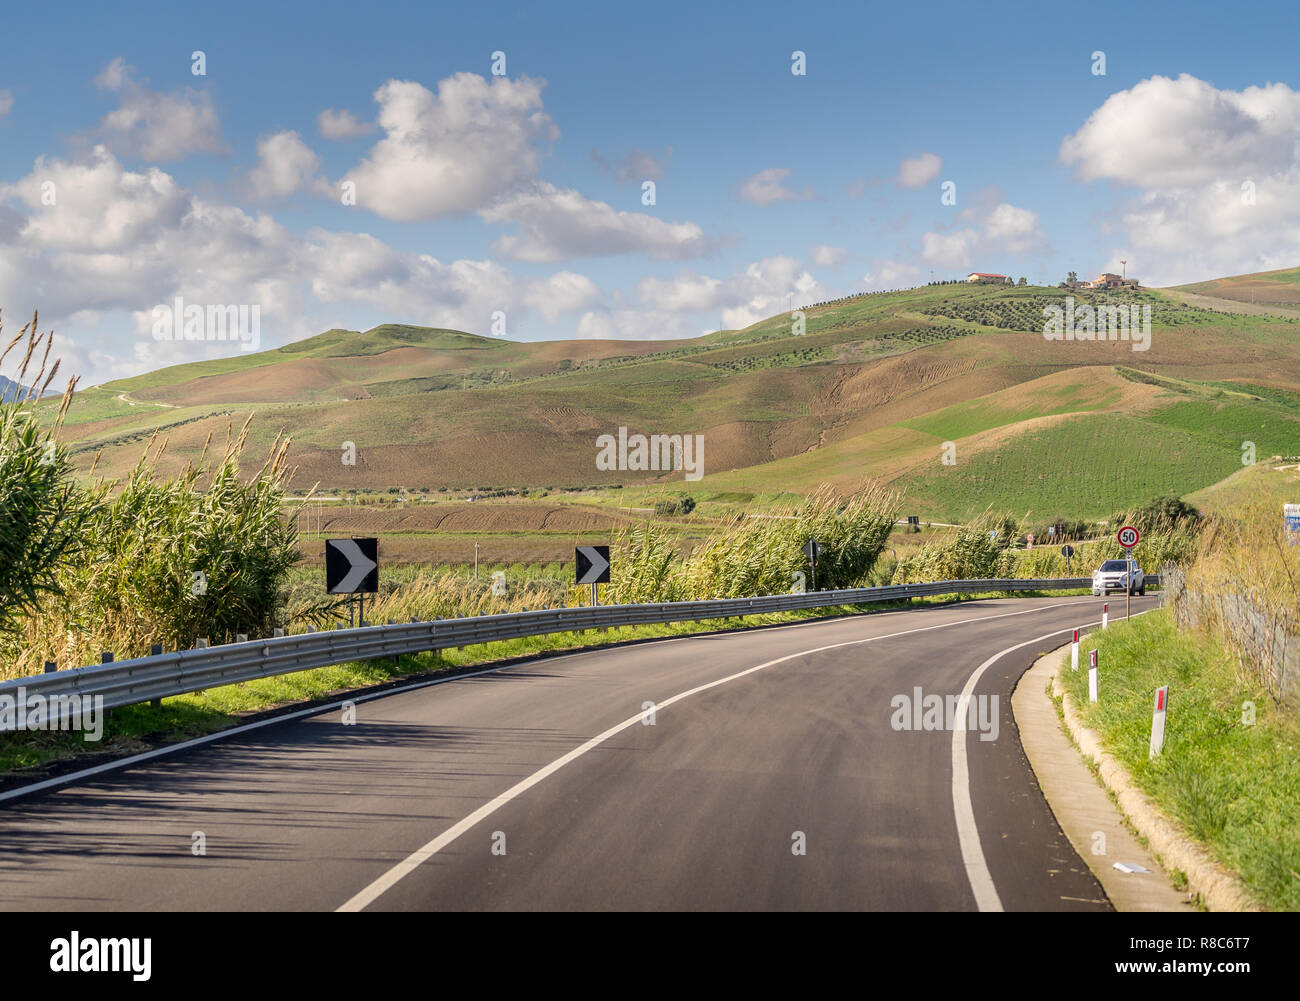 Travel in Italy - Panorama view of highways, houses, mountains, and agrarian fields near Agrigento, Sicily Italy Stock Photo